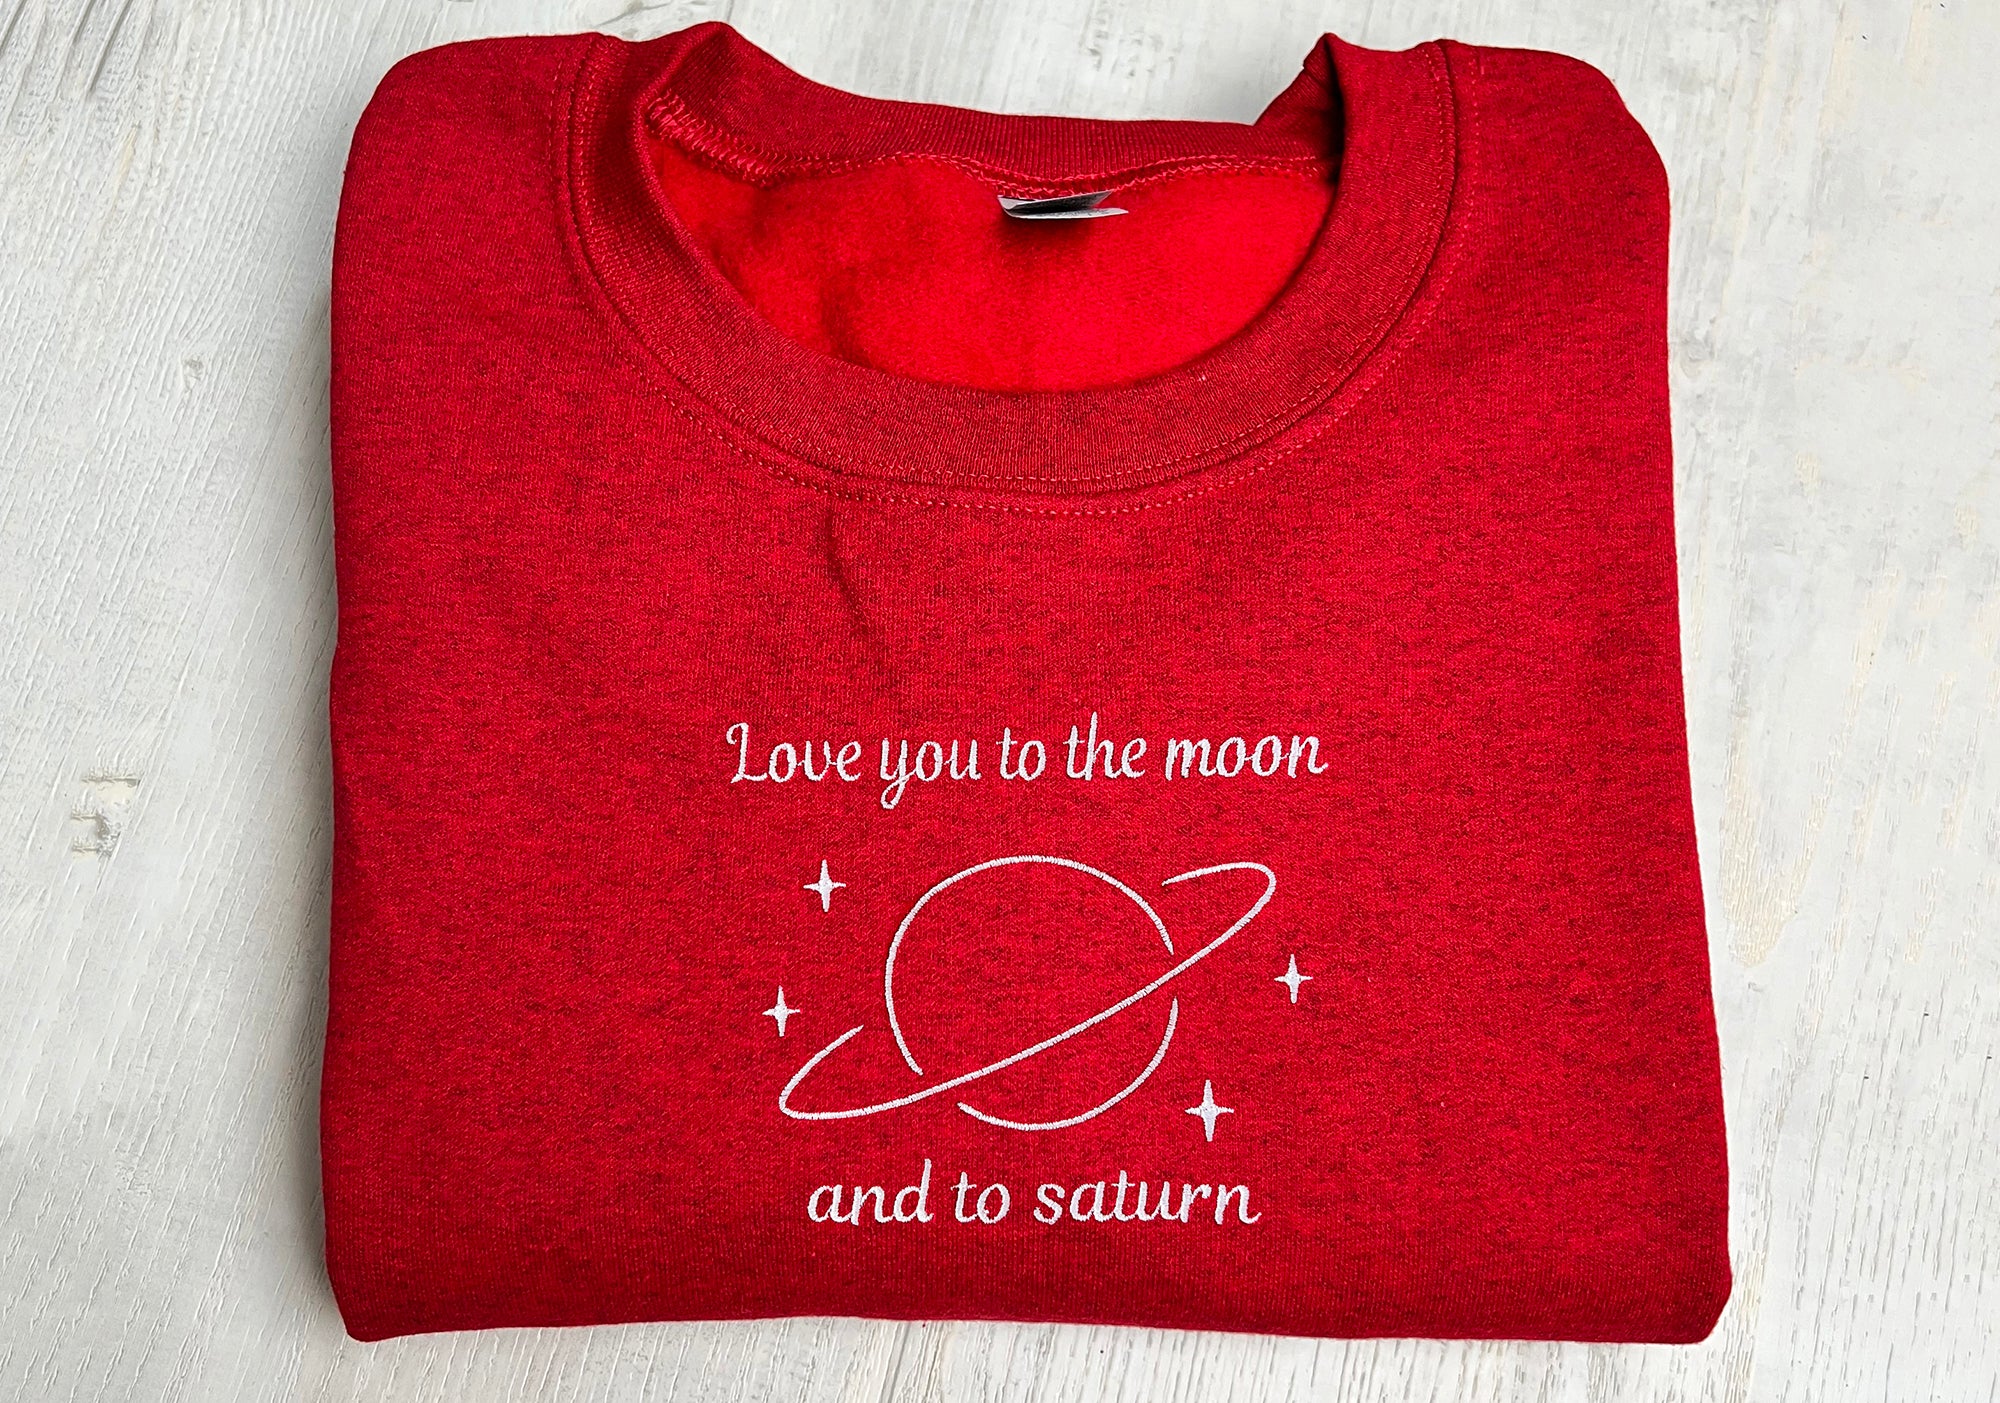 Love You To The Moon And To Saturn Sweatshirt, Taylor Swift Inspired Sweater - obprintshop